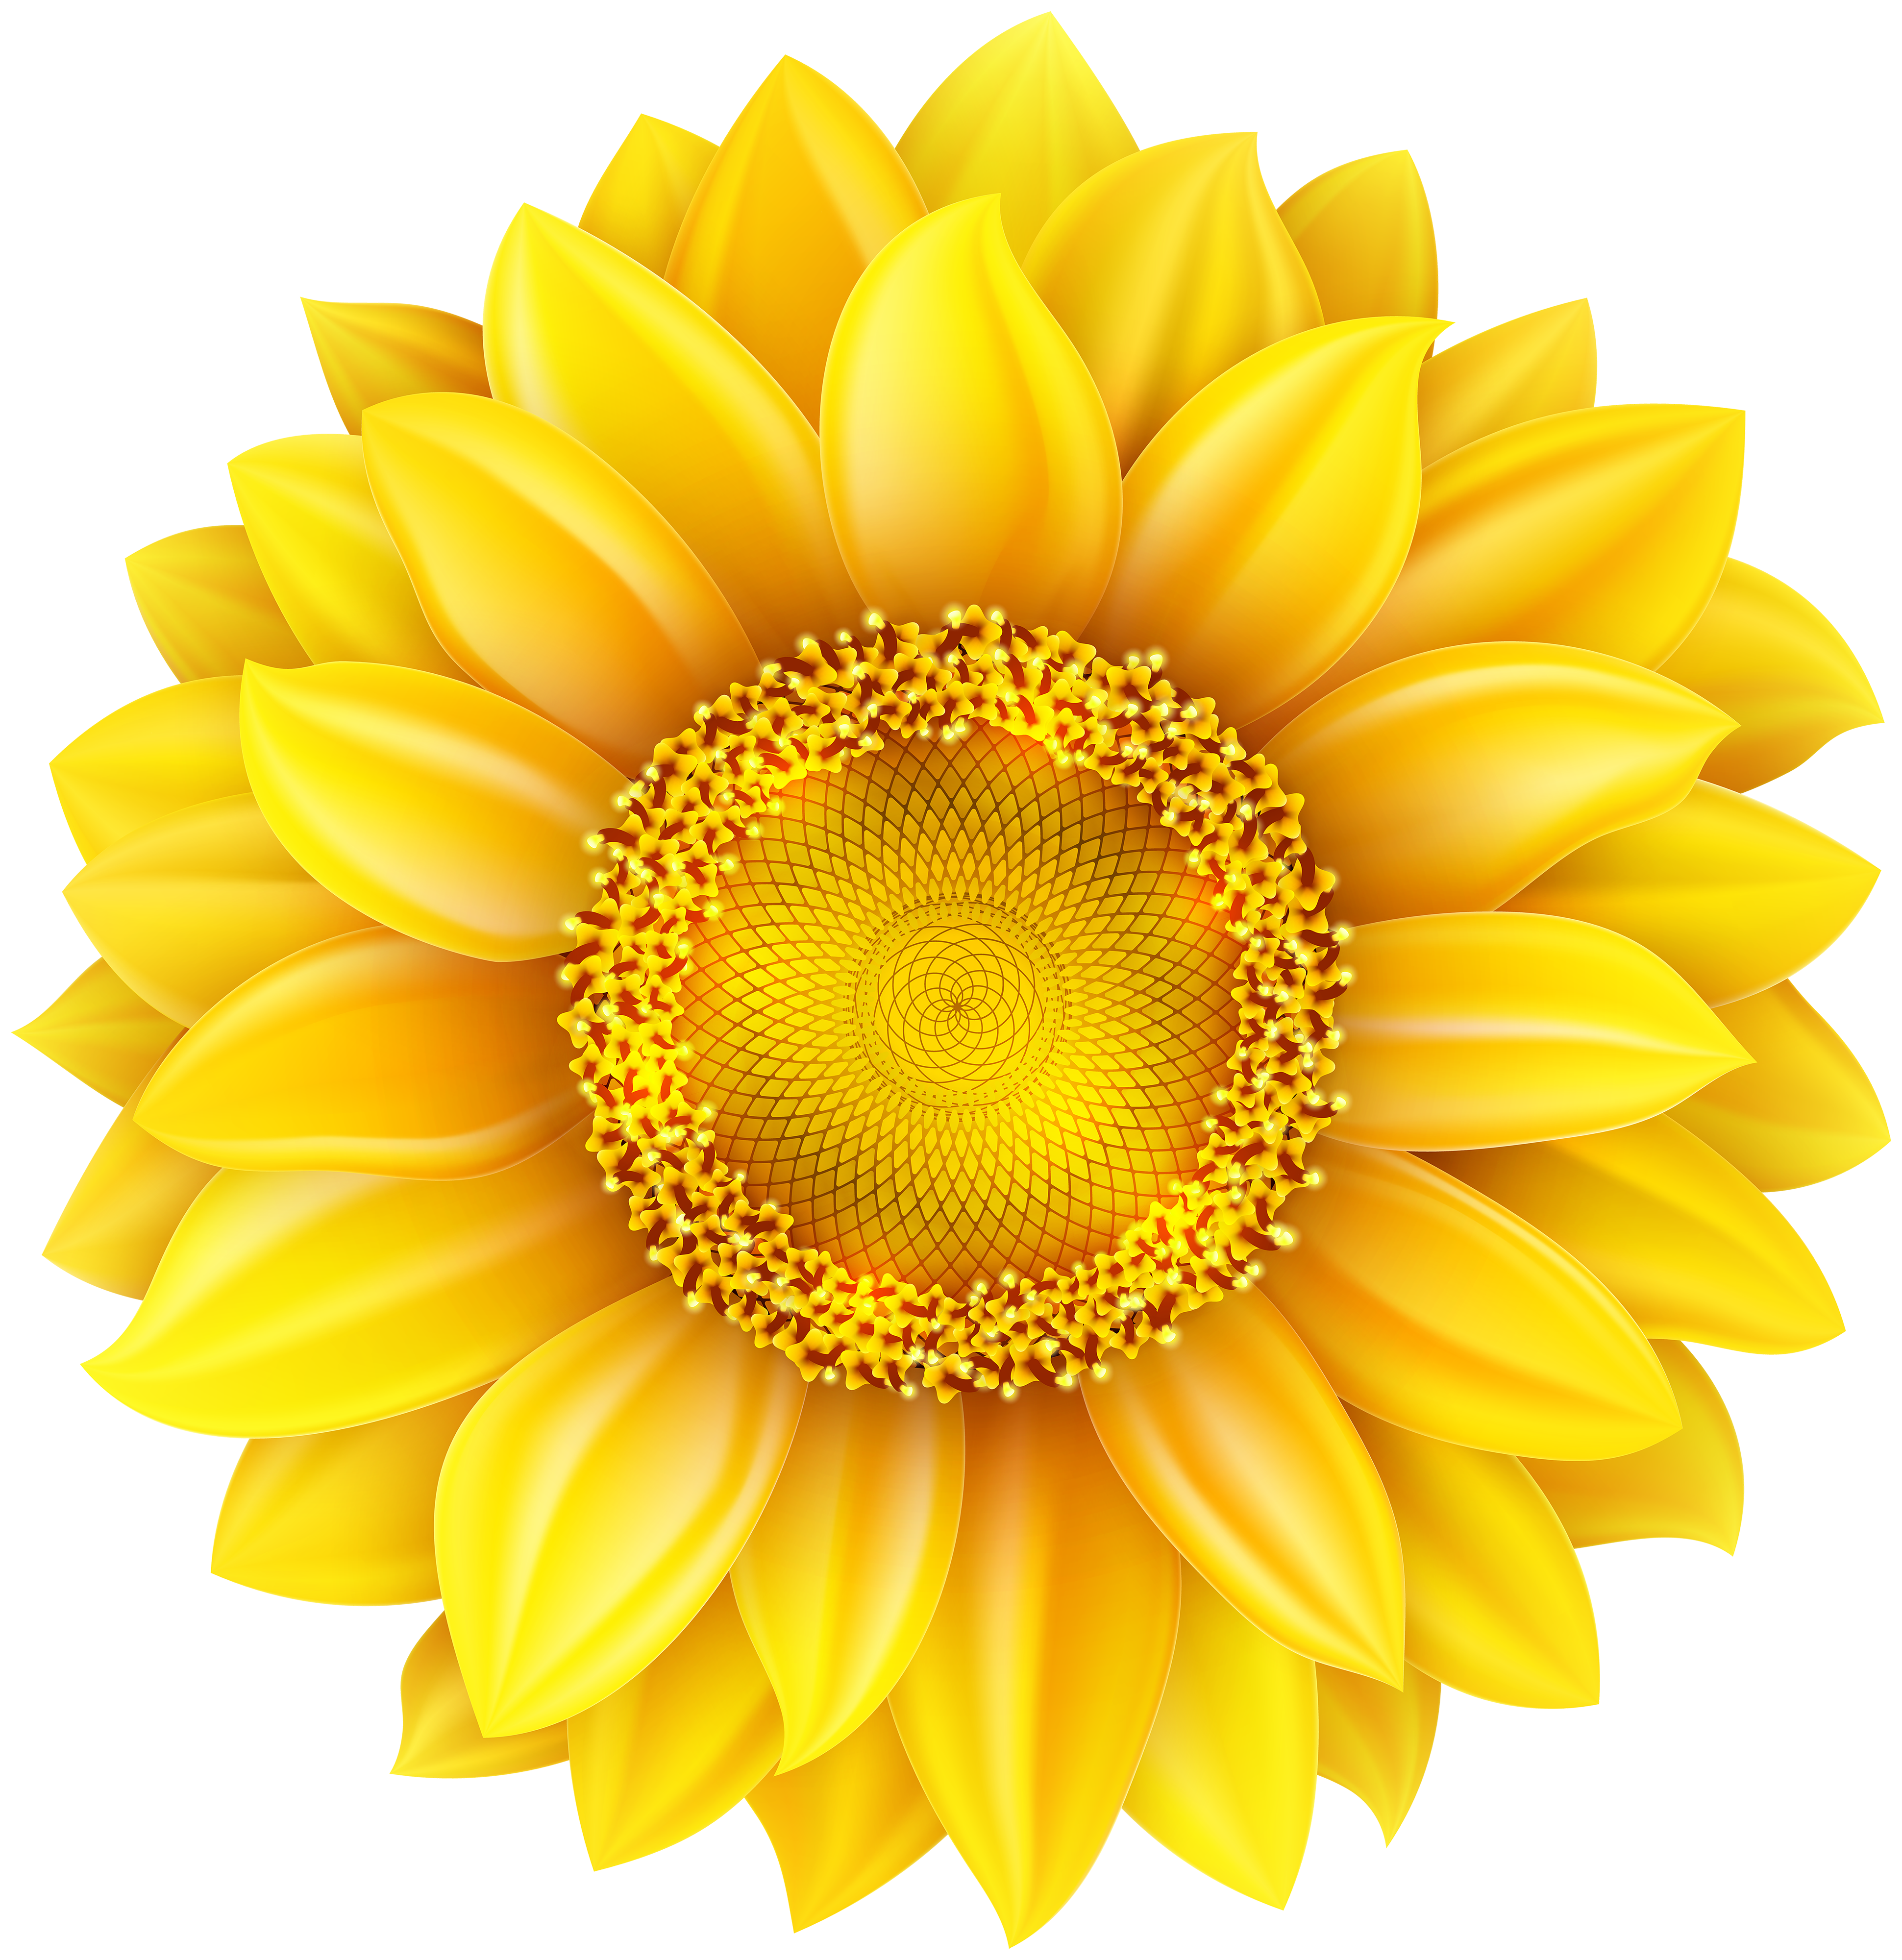 Sunflower PNG Clip Art Image | Gallery Yopriceville - High ...